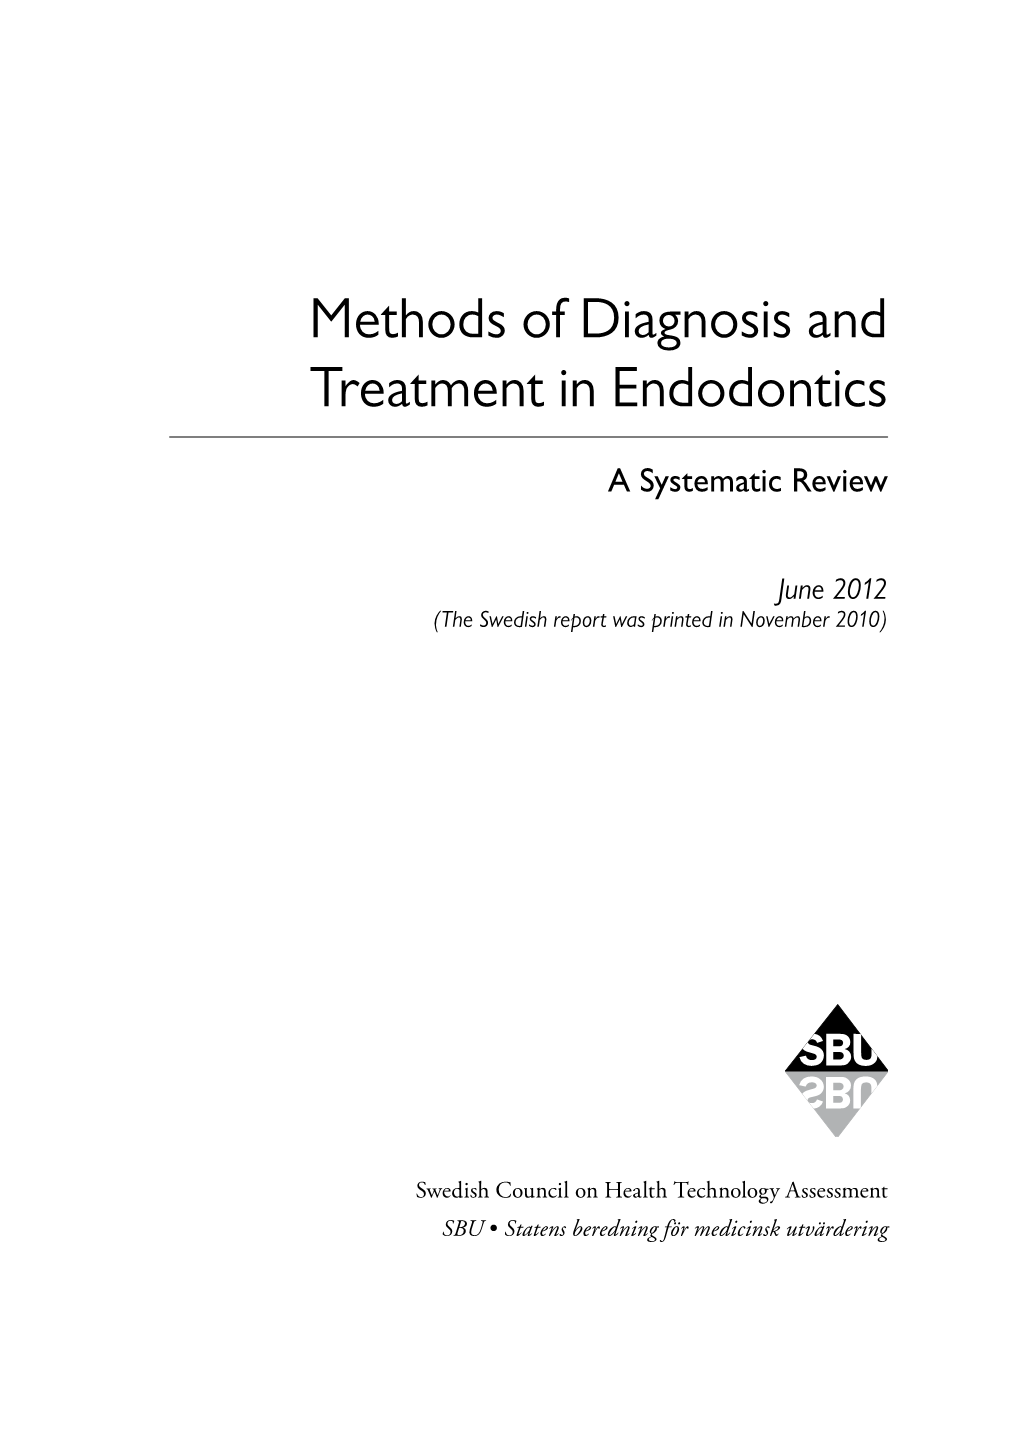 Methods of Diagnosis and Treatment in Endodontics